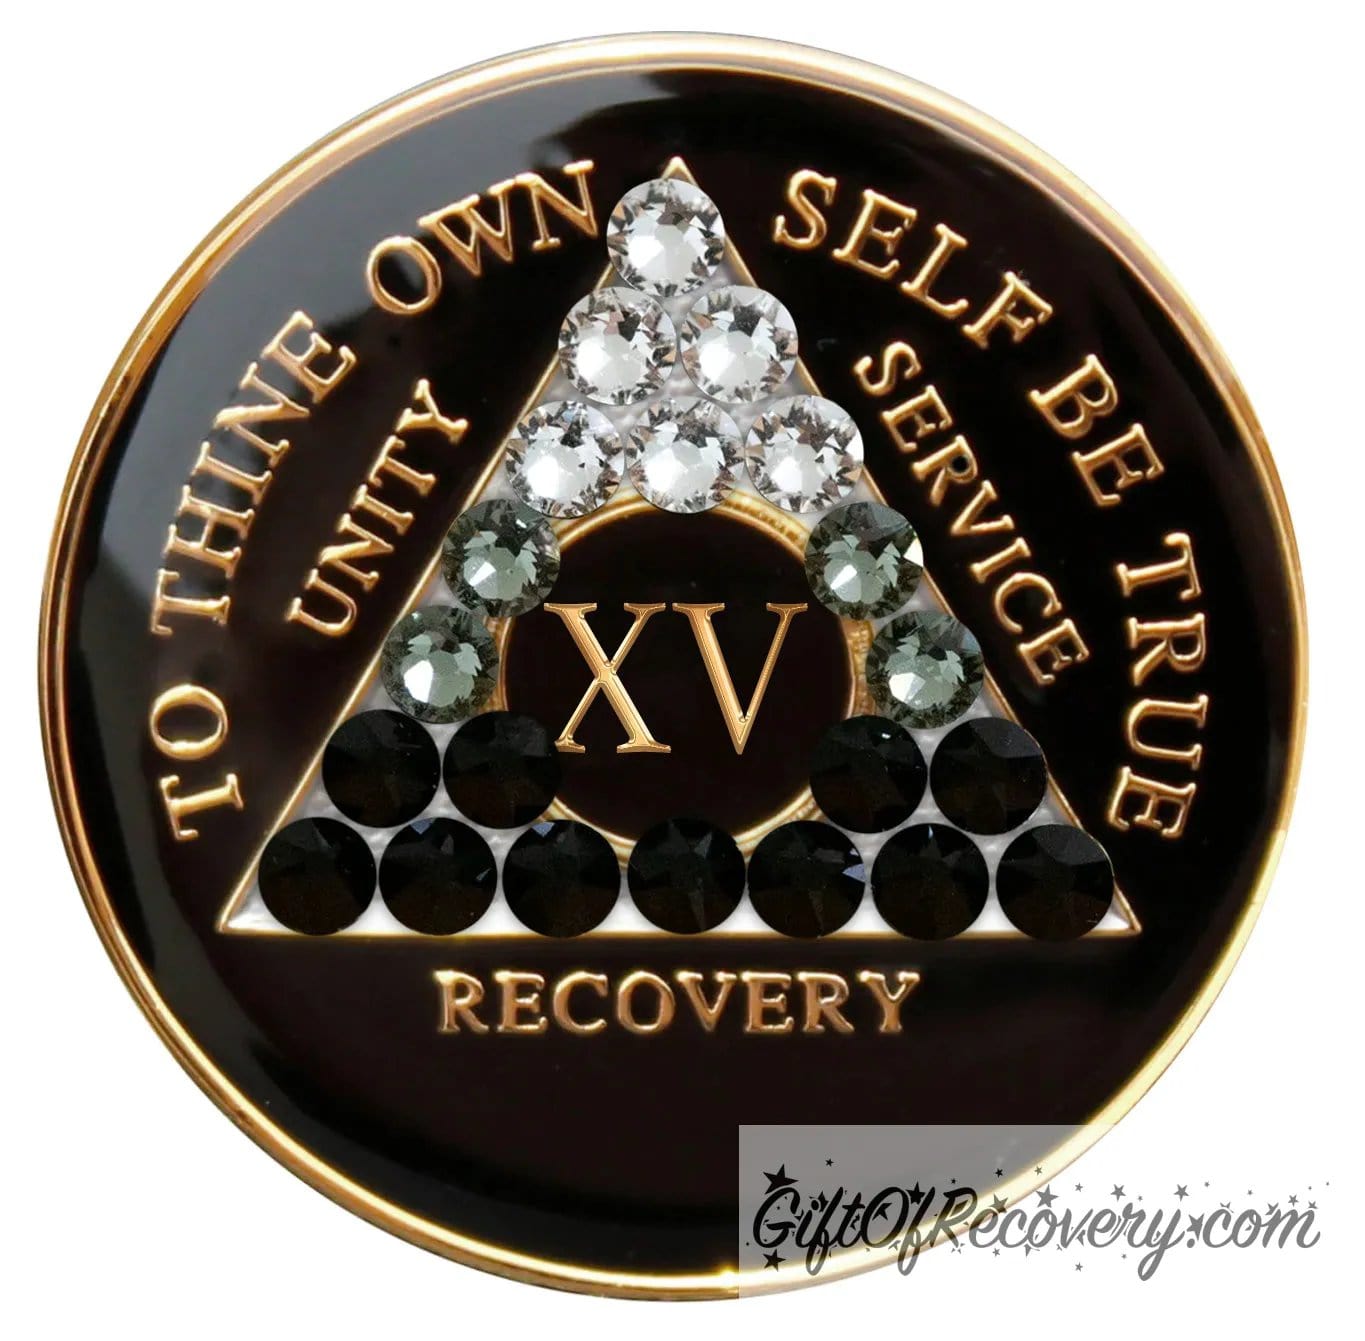 15 year AA recovery medallion black onyx with 21 genuine crystals ranging from clear to grey, to black, representing the transformation of the recovery journey, the AA moto along with unity, service, recovery, roman numeral, and the outer rim of medallion are embossed with 14k gold plated bras, the medallion is sealed in resin for a glossy finish.